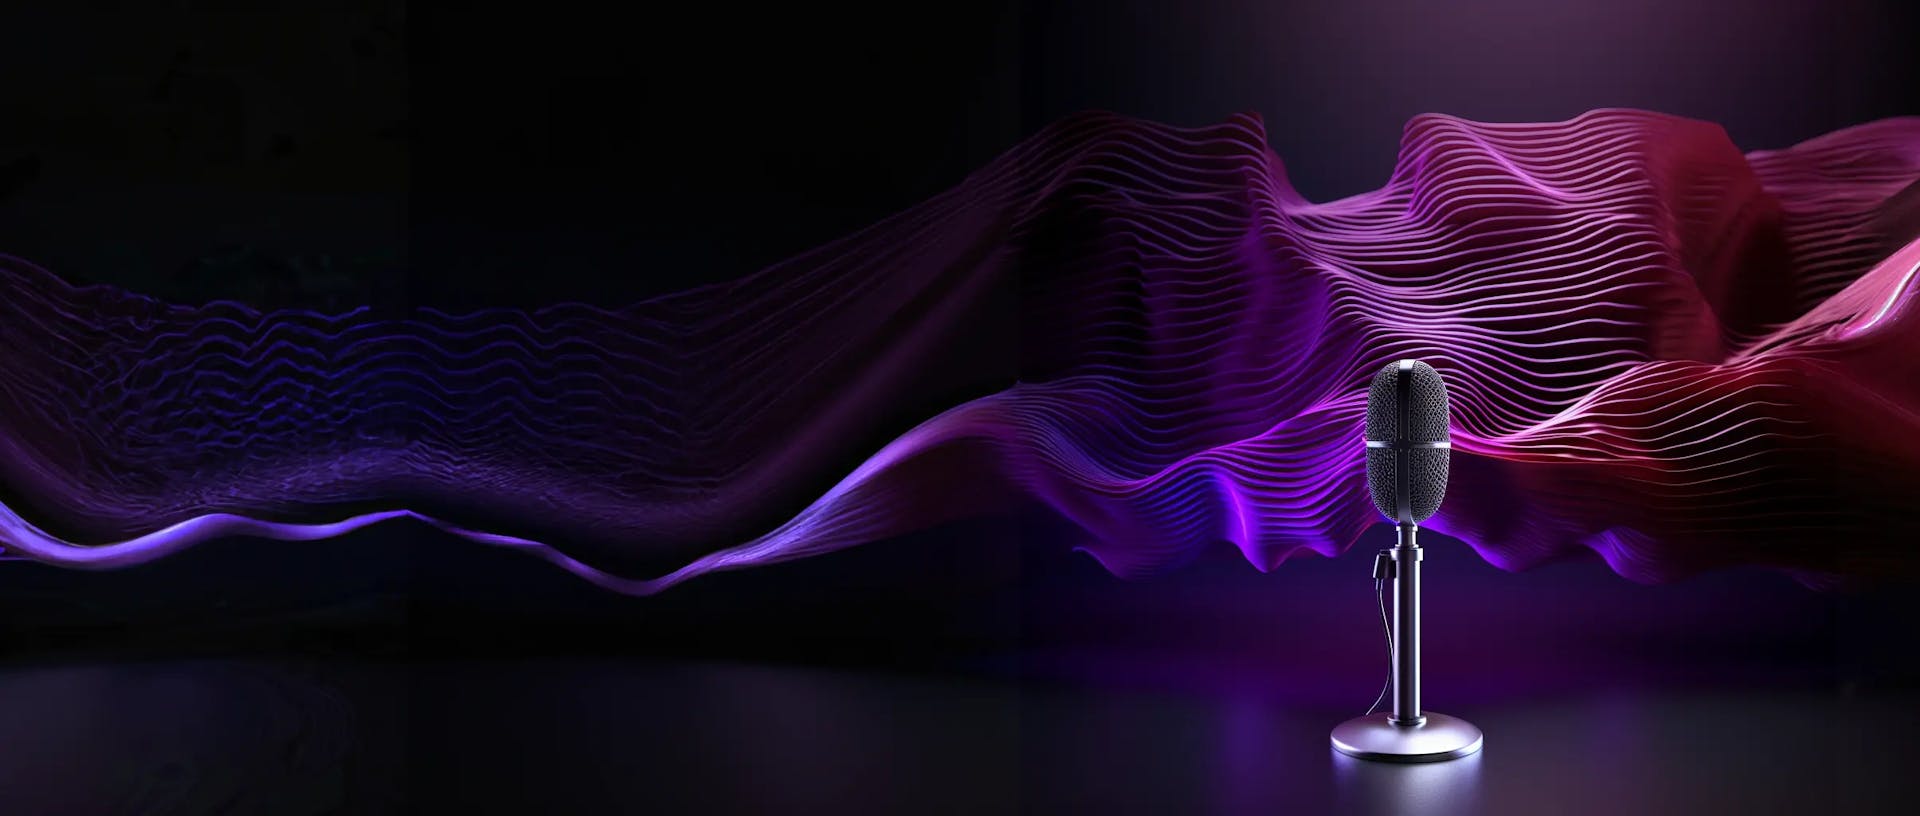 an abstract image representing audiowave